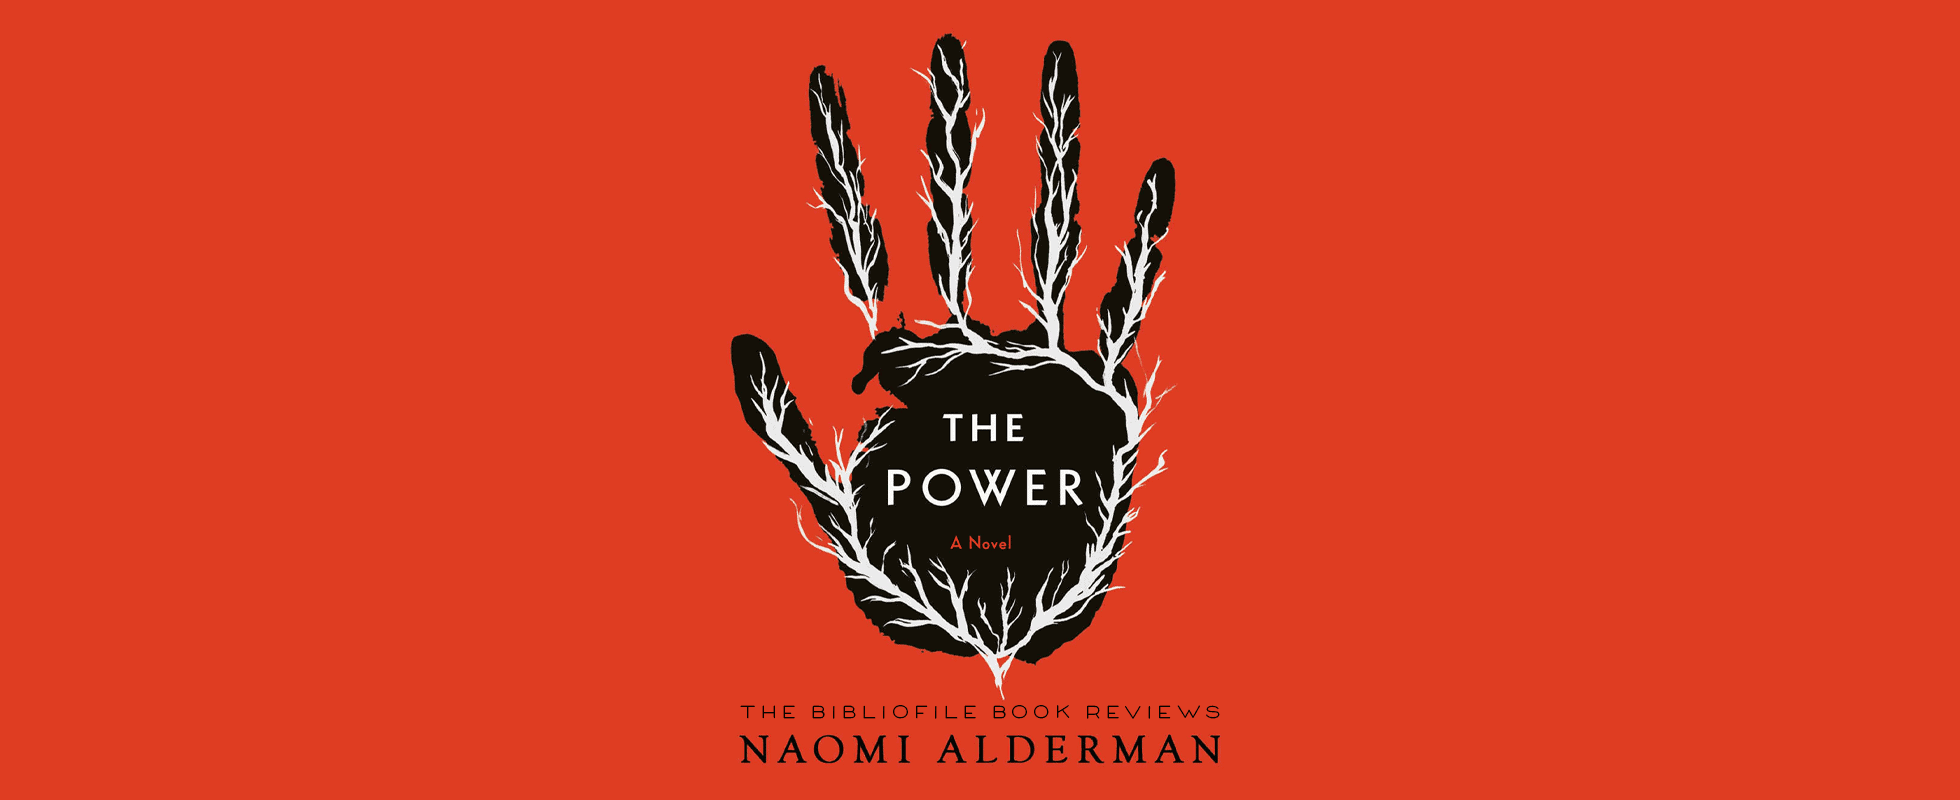 the power by naomi alderman book review plot summary synopsis recap spoilers discussion questions